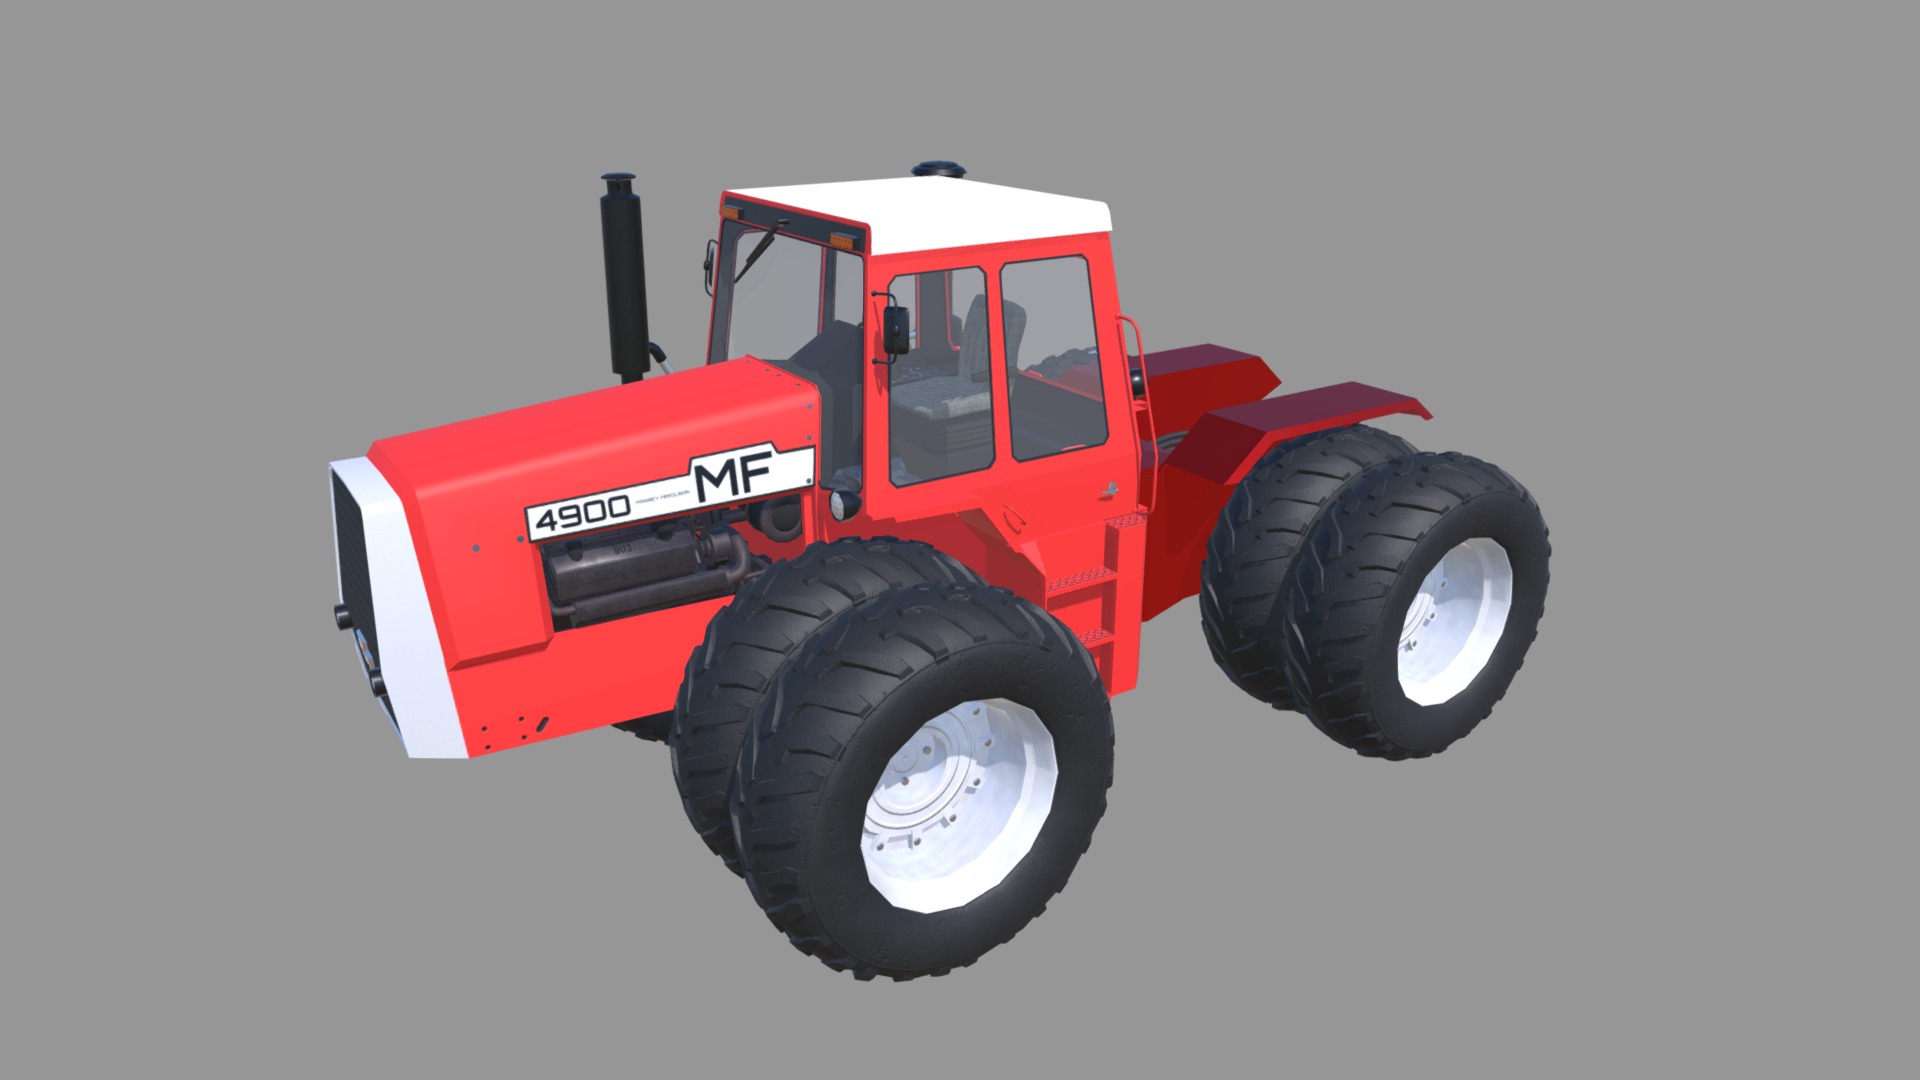 3D model Massey-Fergusson 4900 - This is a 3D model of the Massey-Fergusson 4900. The 3D model is about a red tractor with large wheels.